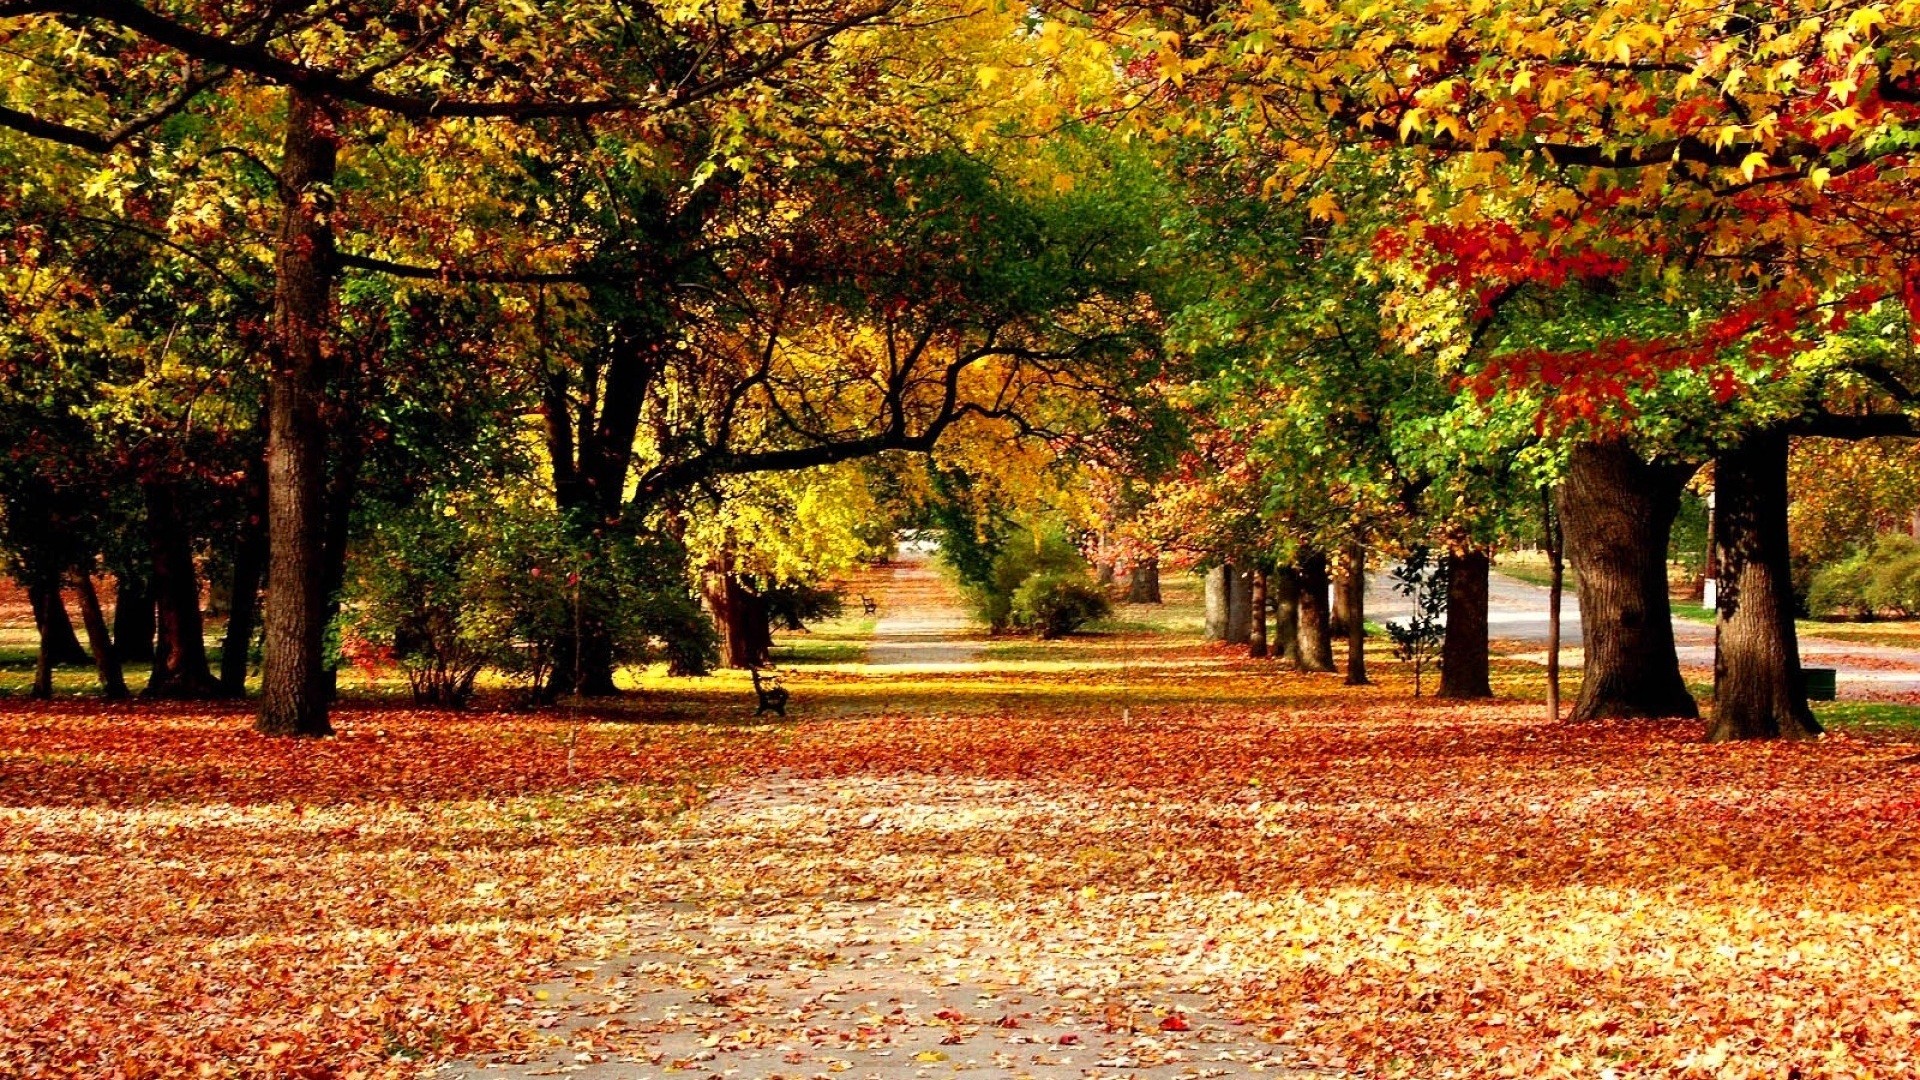 1920x1080 Autumn Pictures For Desktop Backgrounds - Wallpaper Cave Fall ...